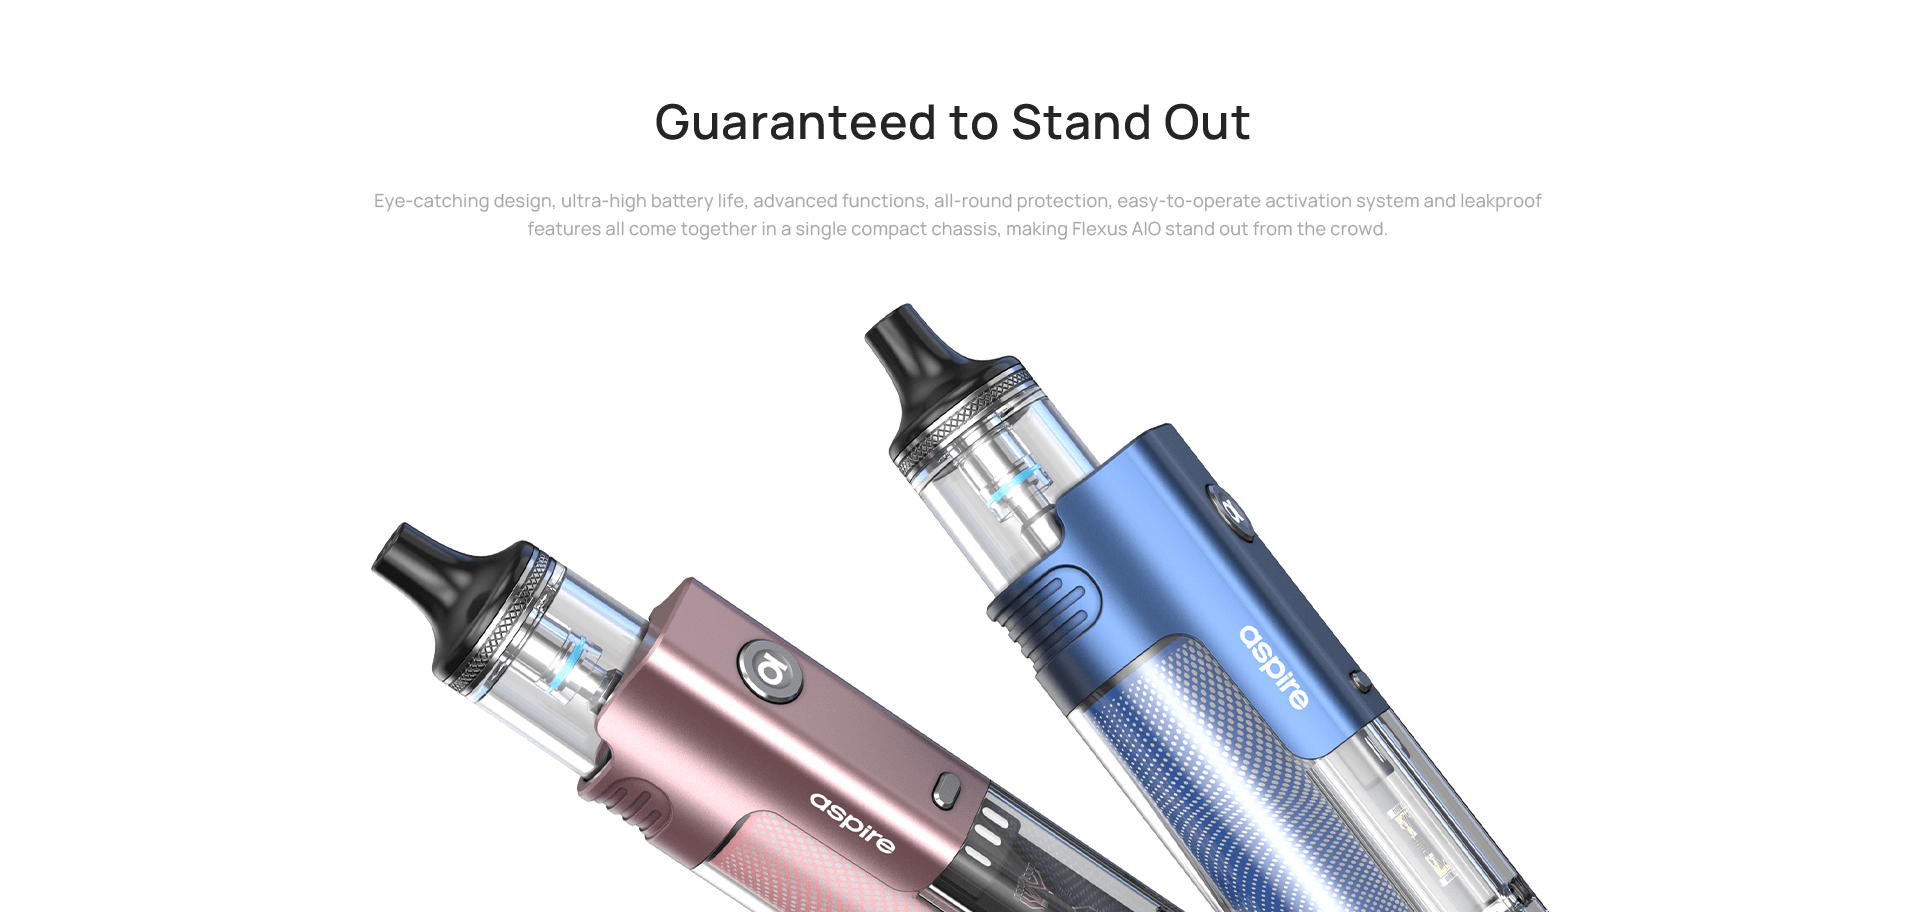 Aspire Flexus AIO - 'guaranteed to stand out'